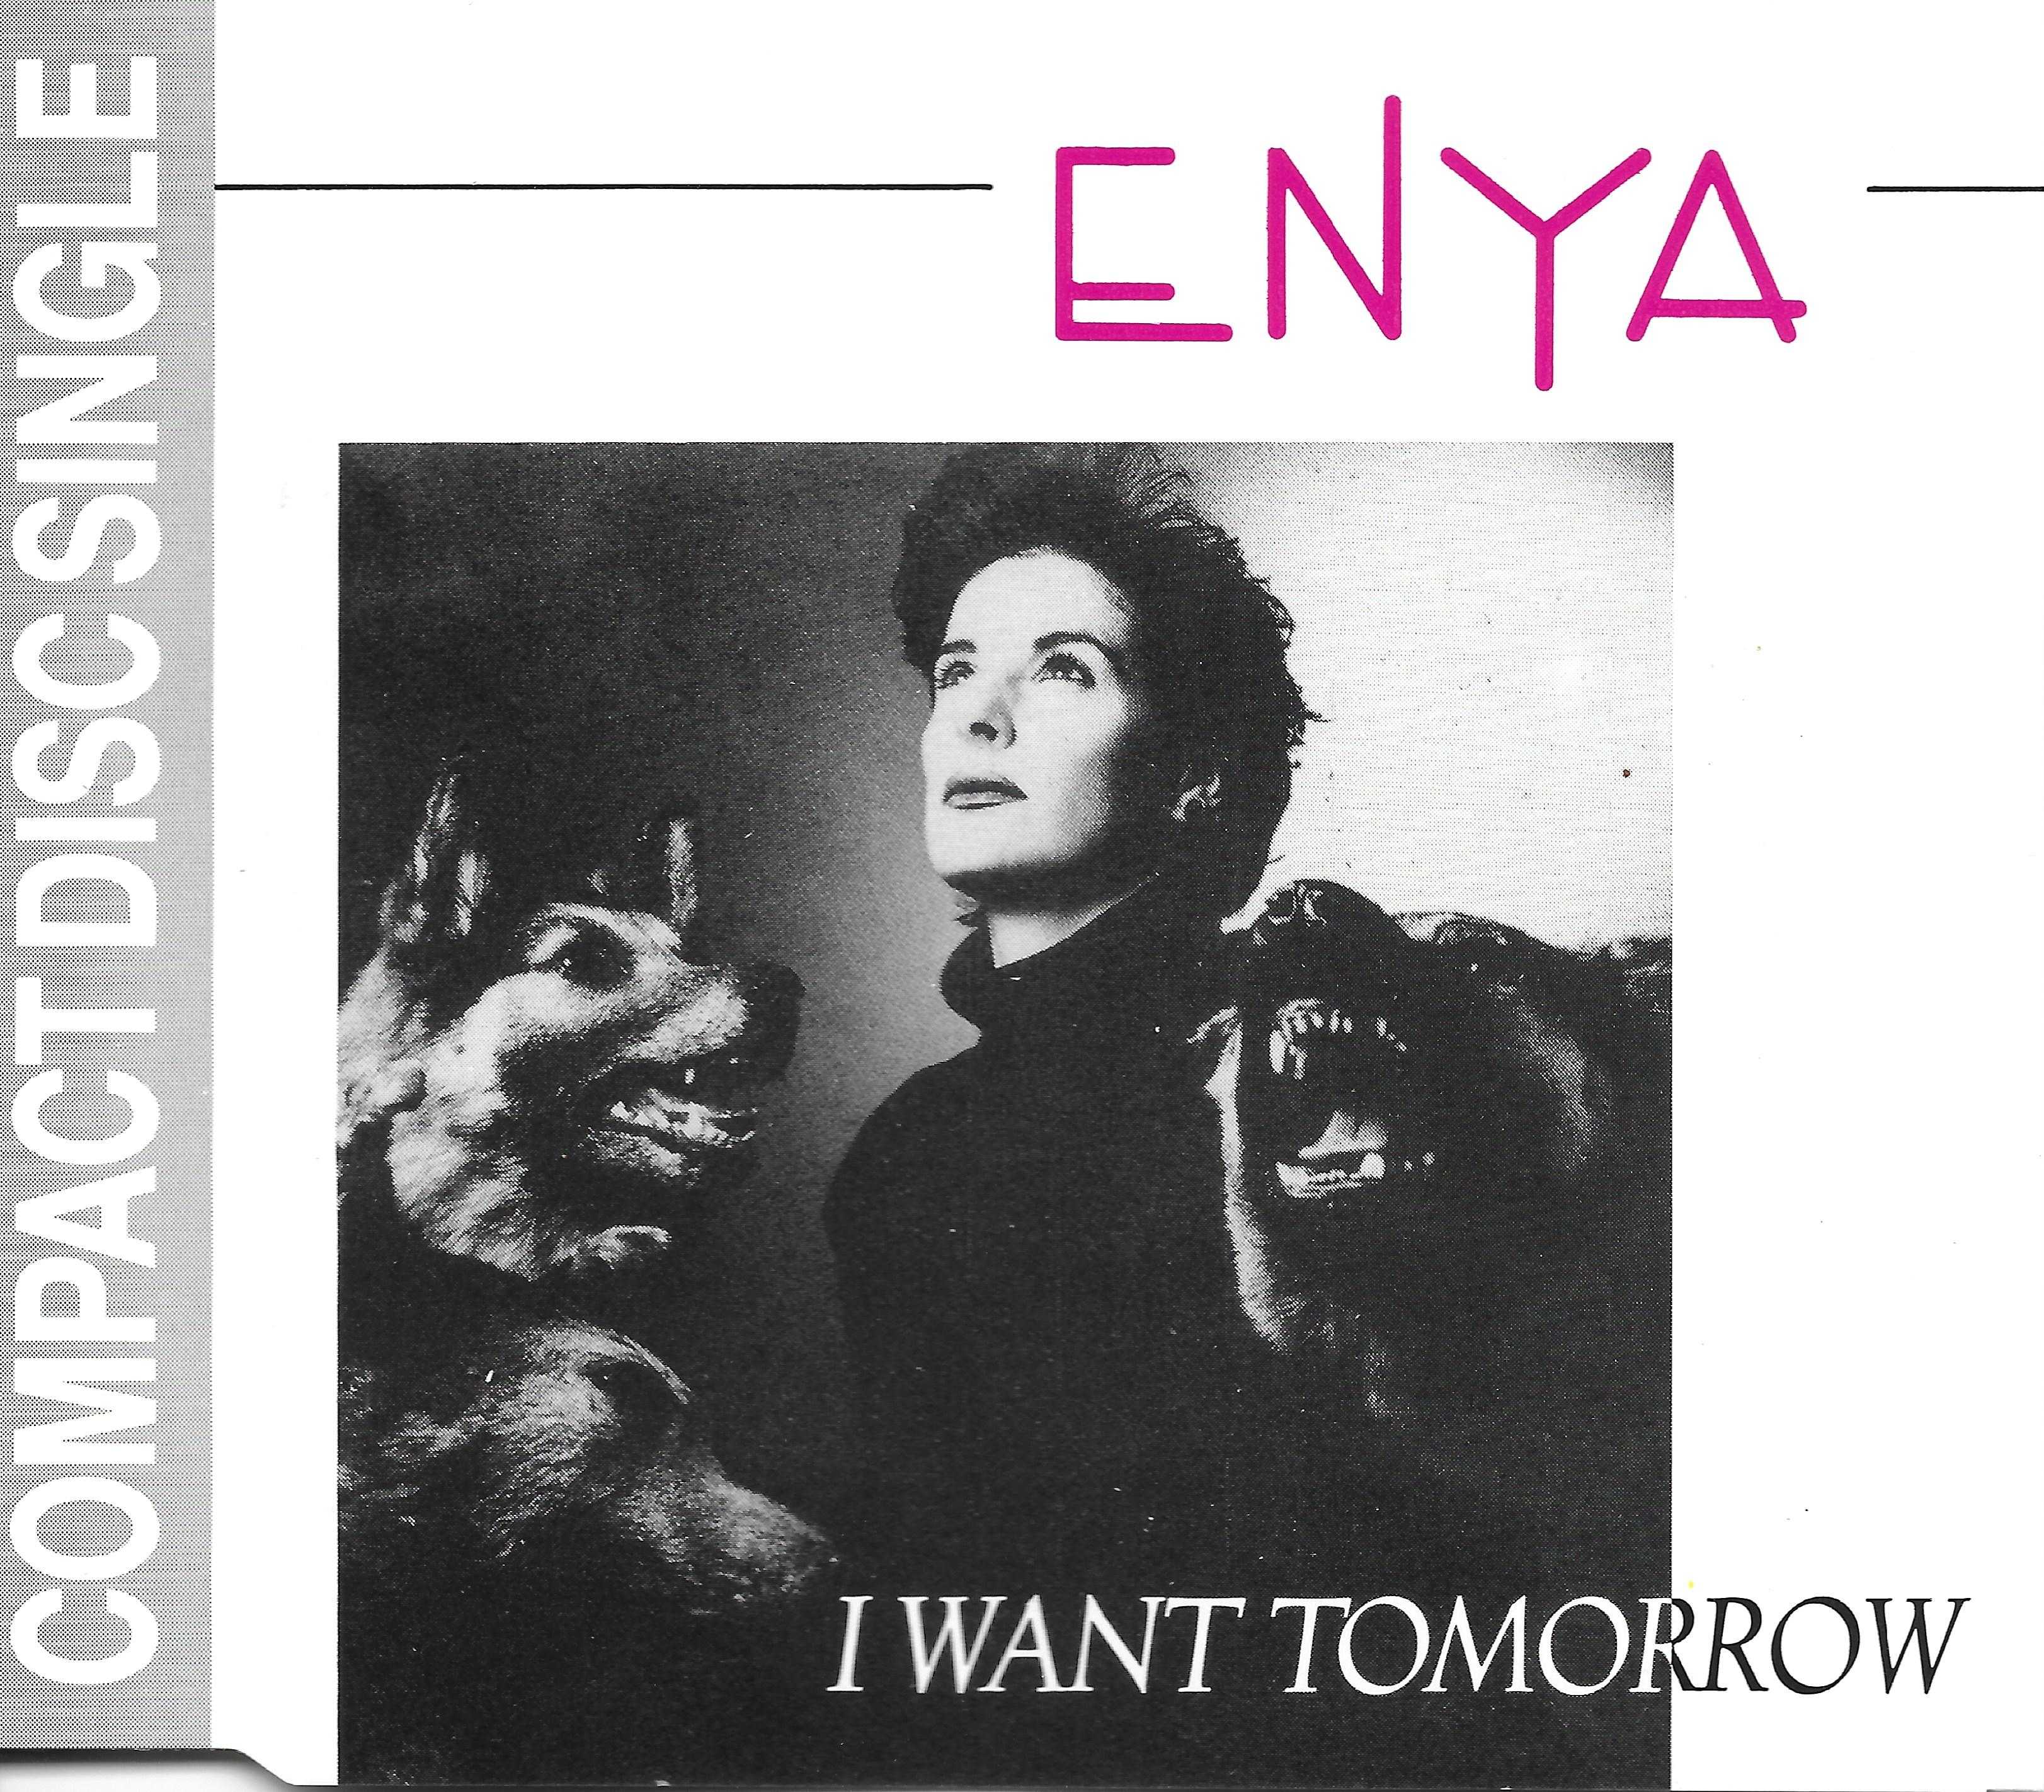 Picture of CD RSL 201 I want tomorrow (The Celts) by artist Enya from the BBC cdsingles - Records and Tapes library